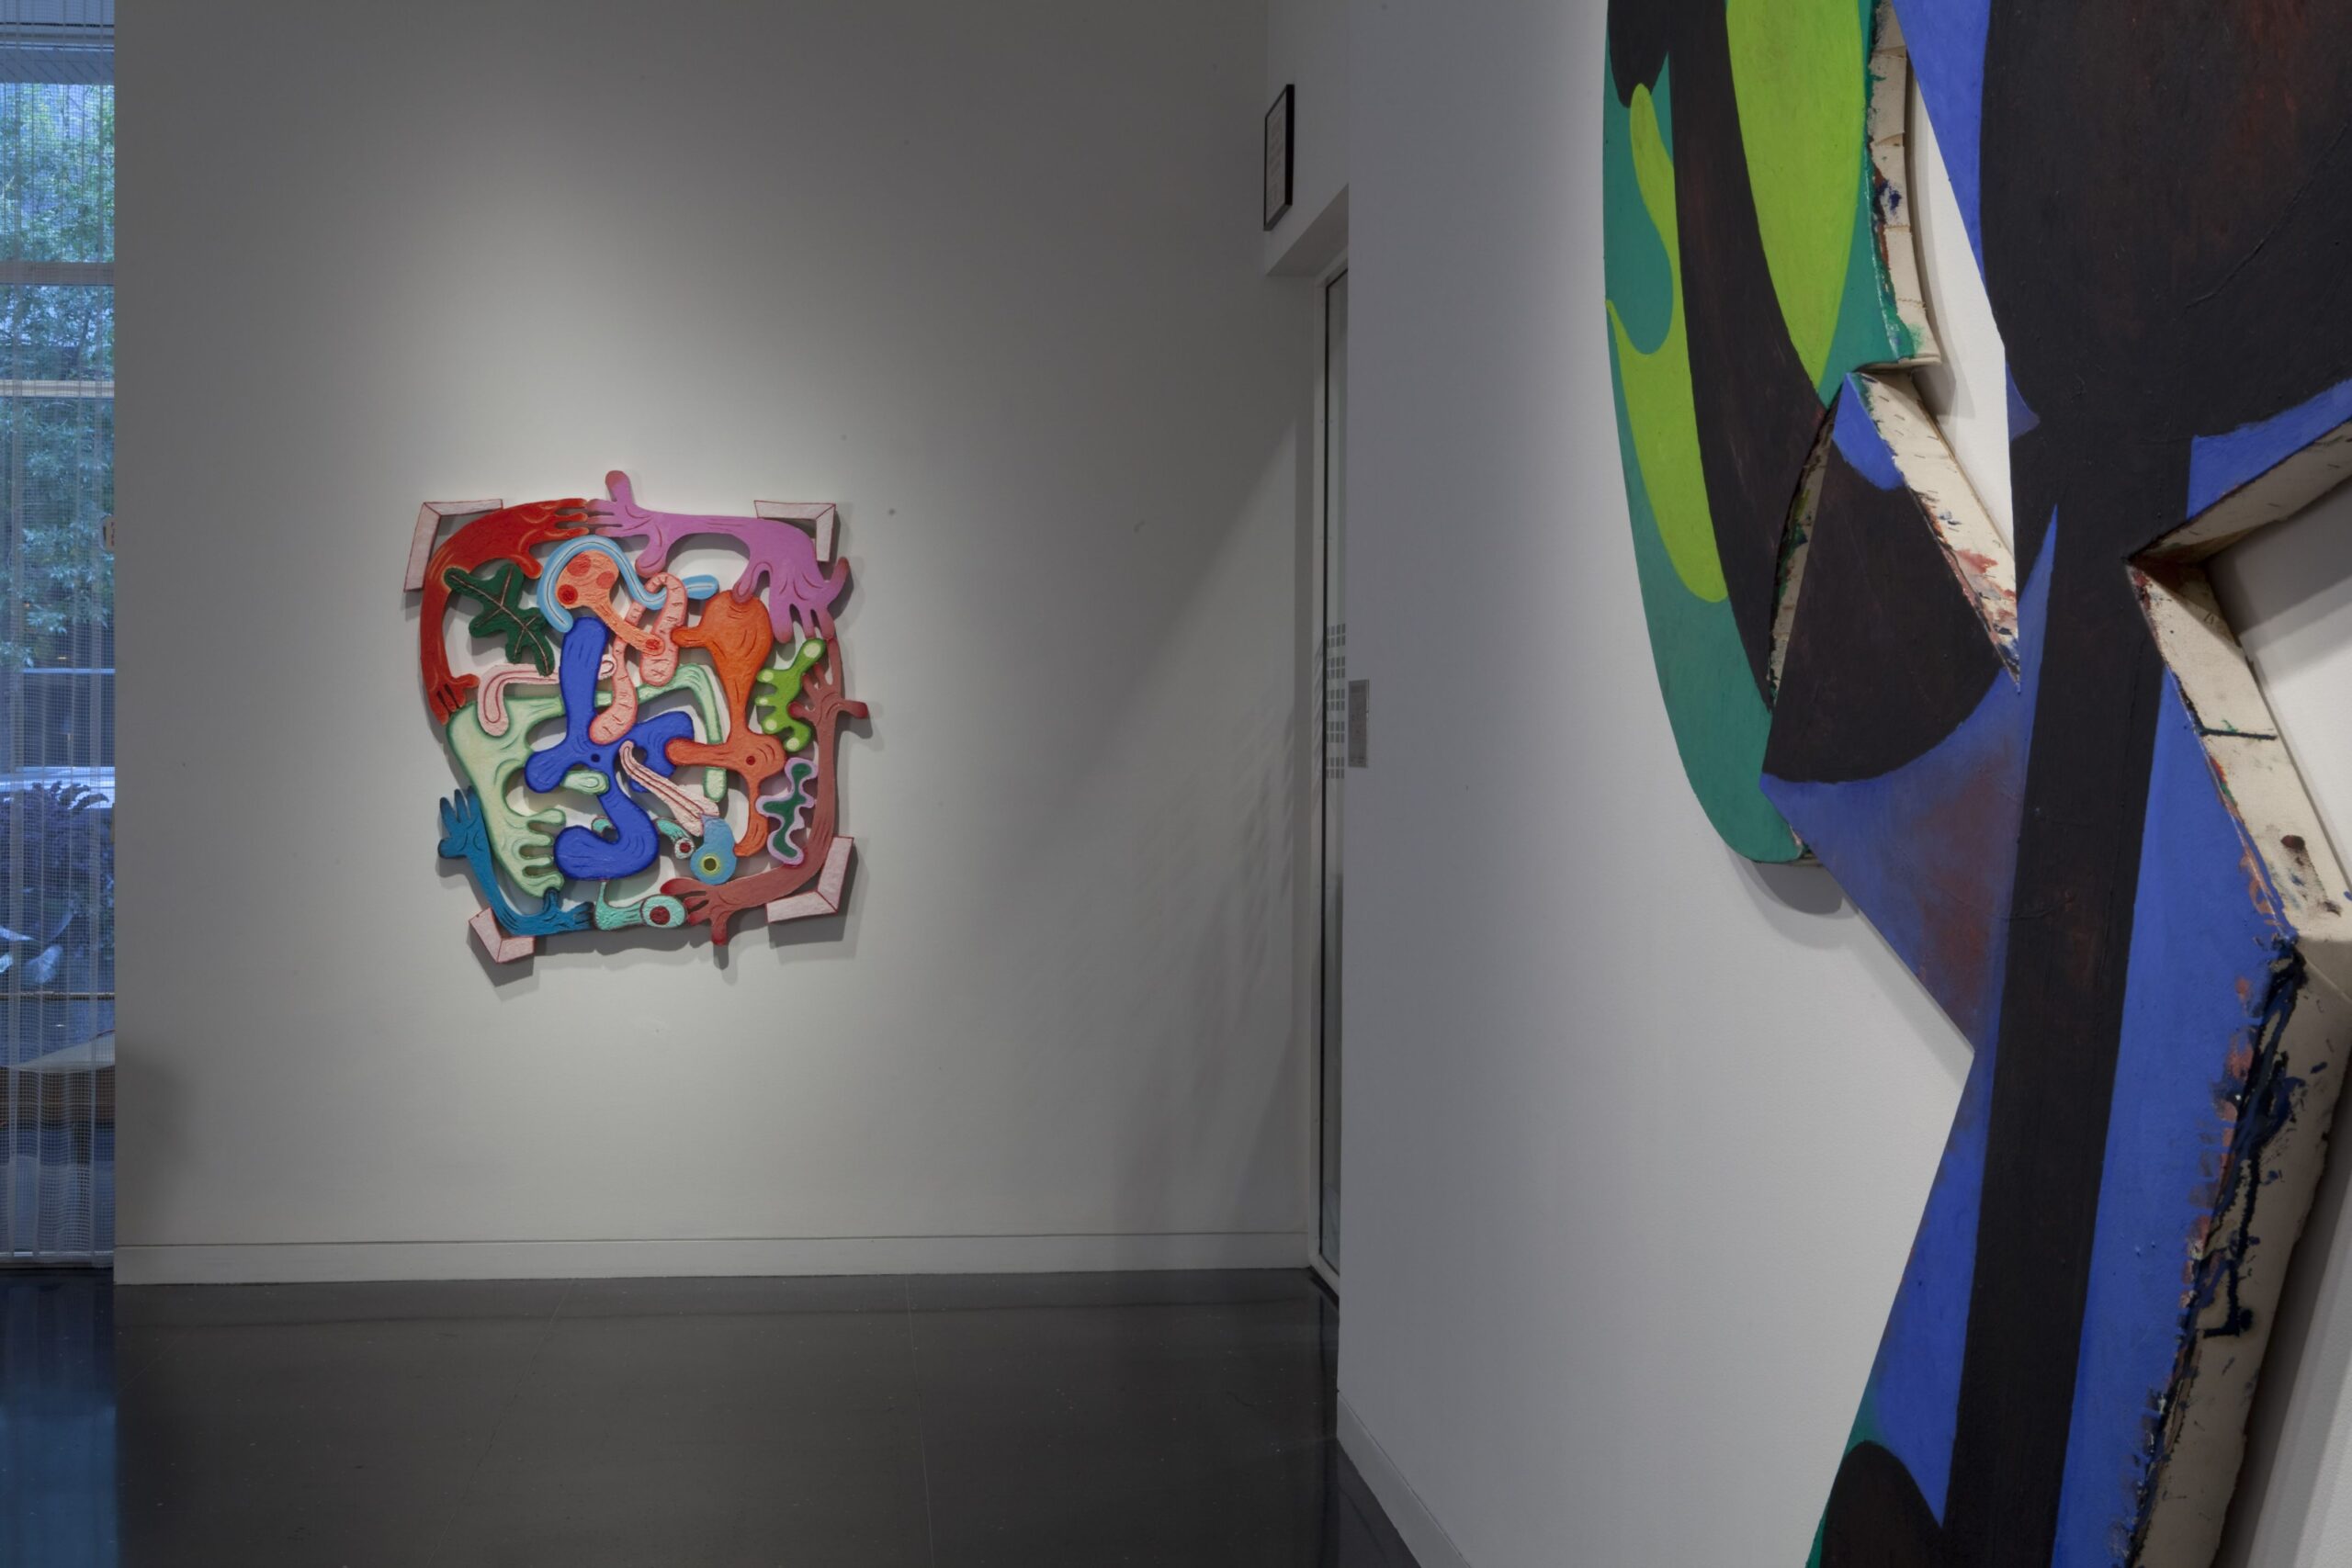 A white gallery space with two large, abstract artworks in colorful prints cut and carved into amorphous shapes. In the artwork furthest from the viewer, several colorful arms interlock to form a border or frame around the work.